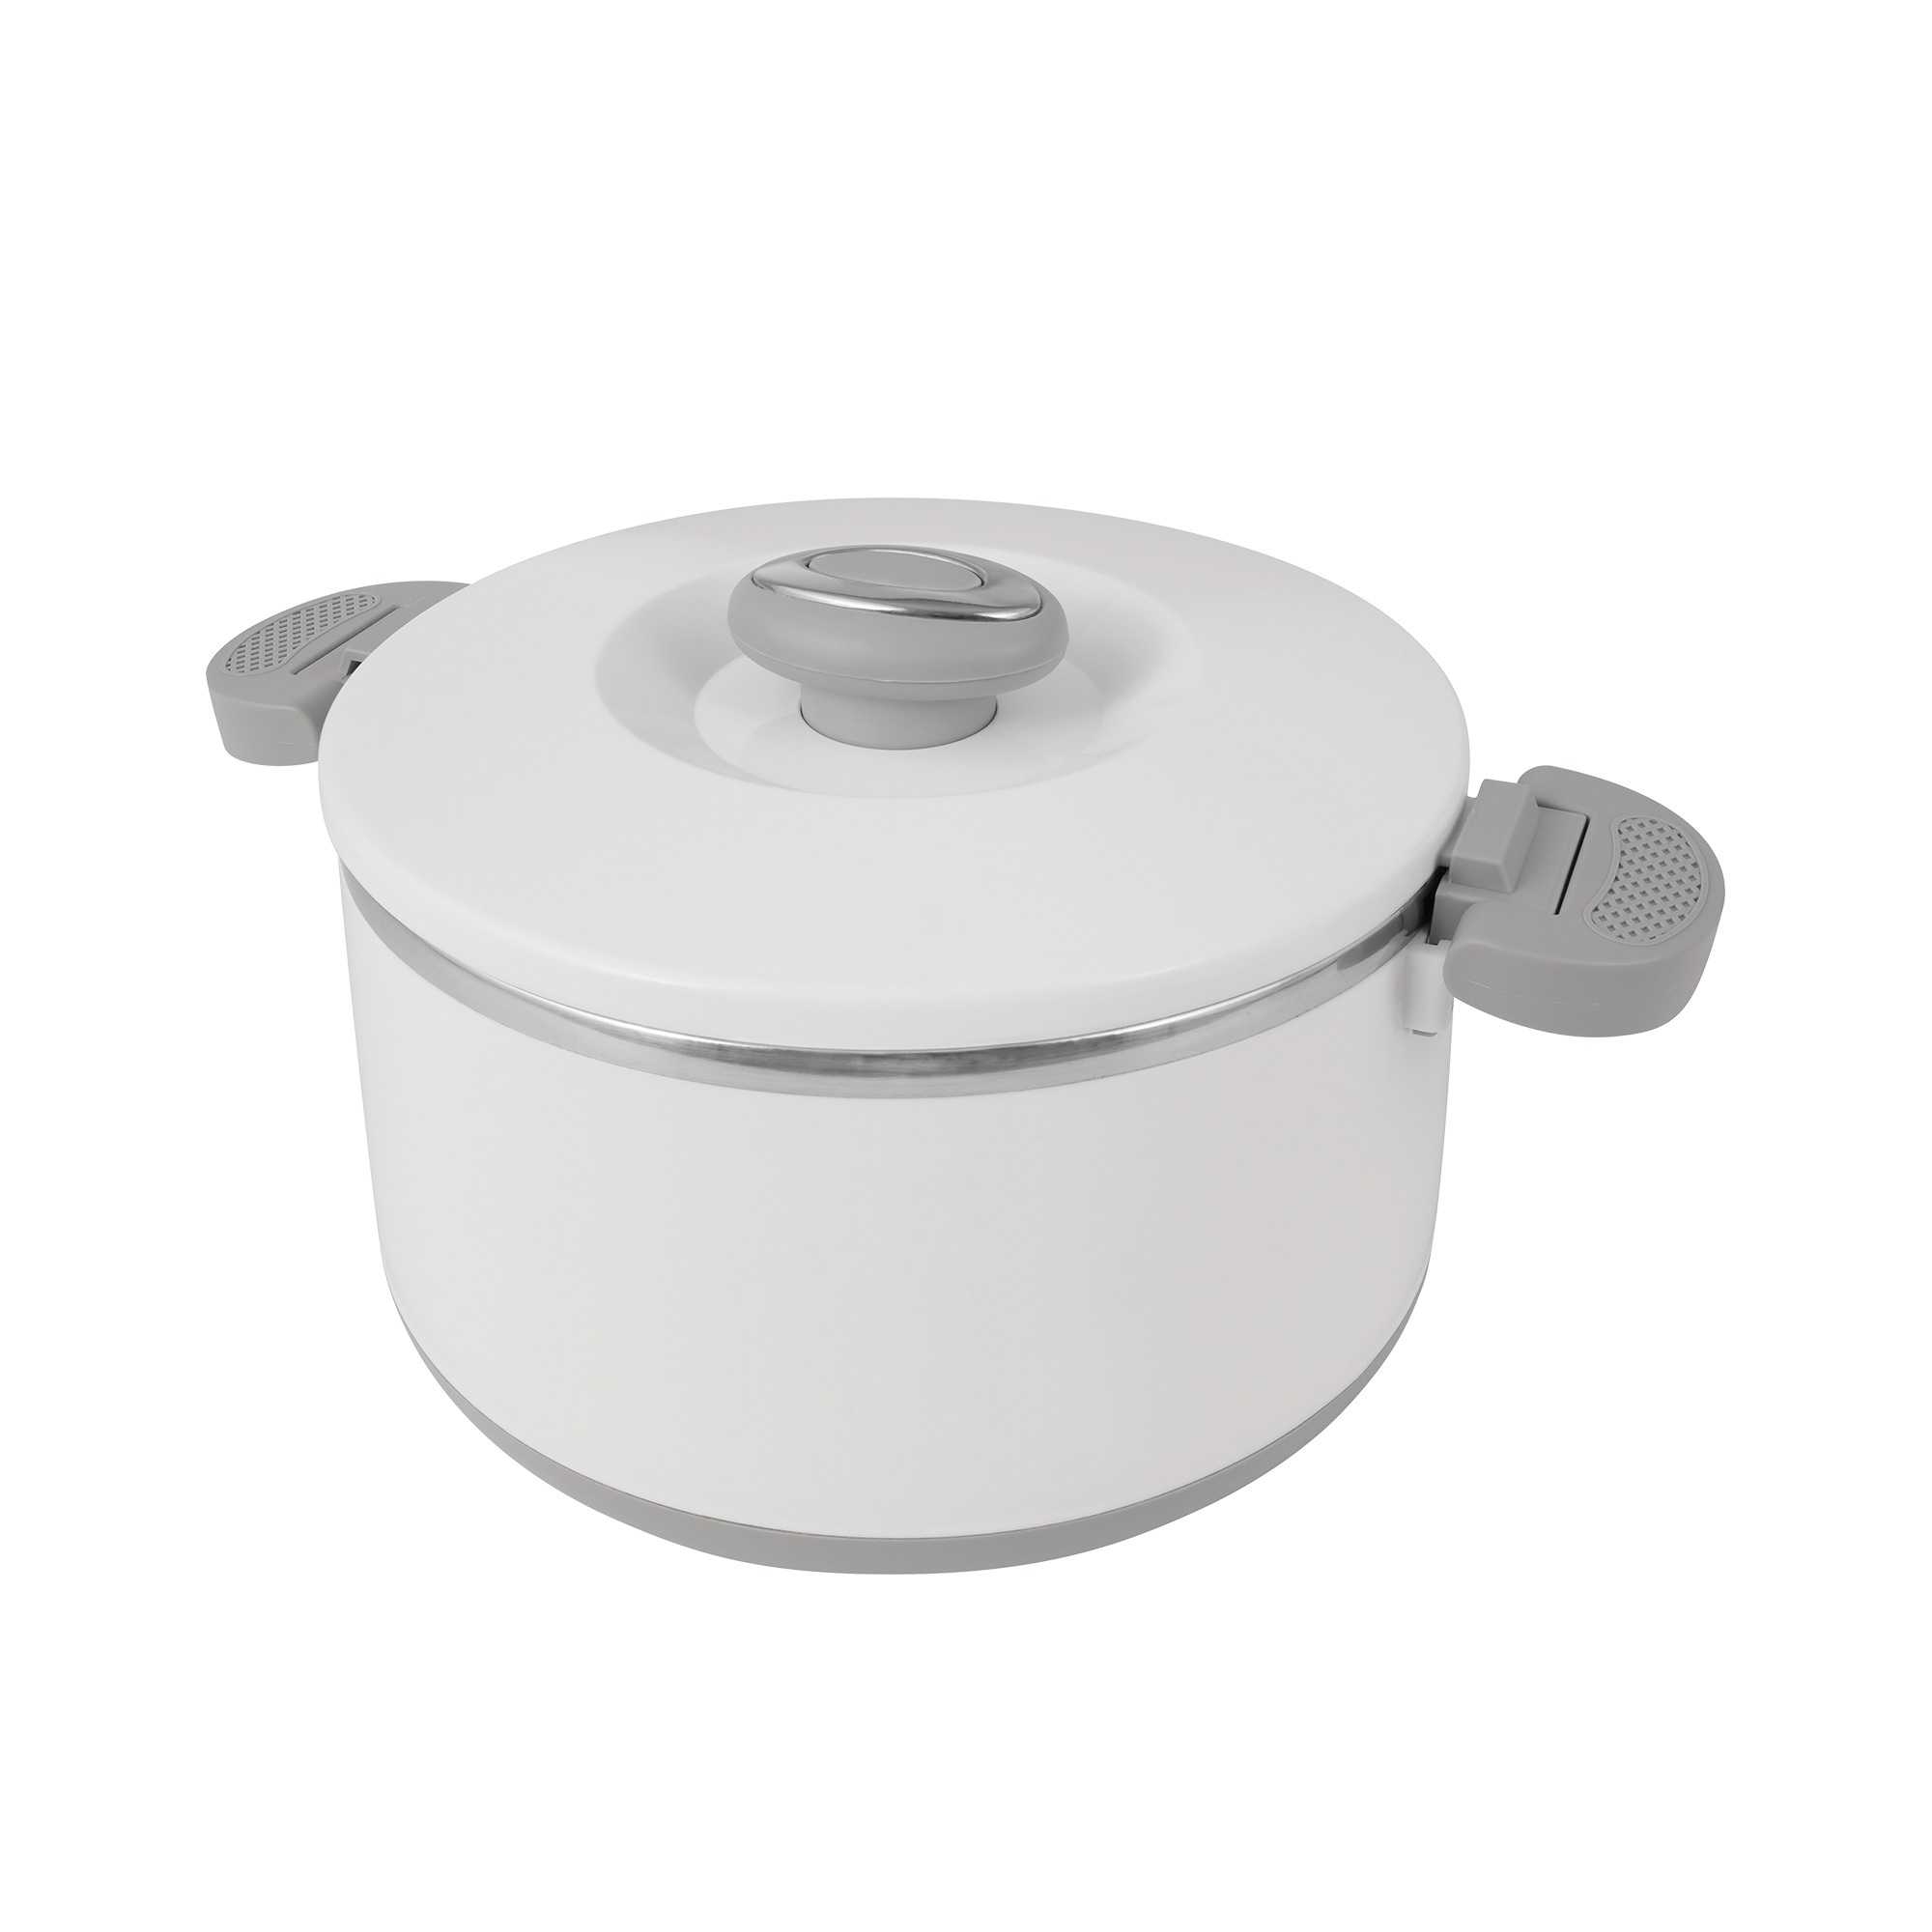 Pyrolux Pyrotherm Food Warmer 5L Image 1